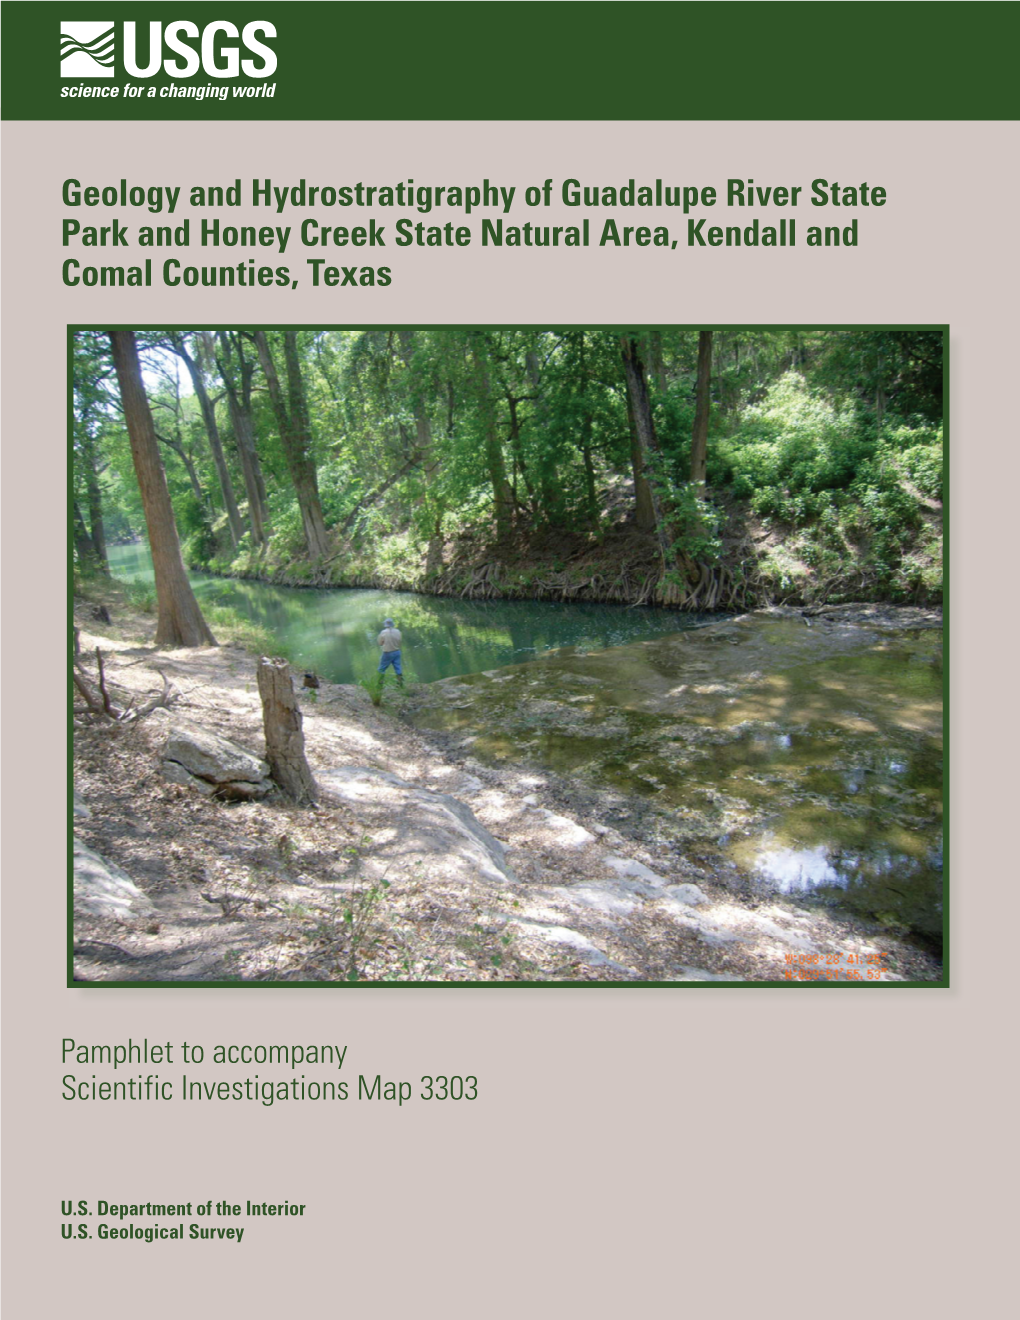 Geology and Hydrostratigraphy of Guadalupe River State Park and Honey Creek State Natural Area, Kendall and Comal Counties, Texas